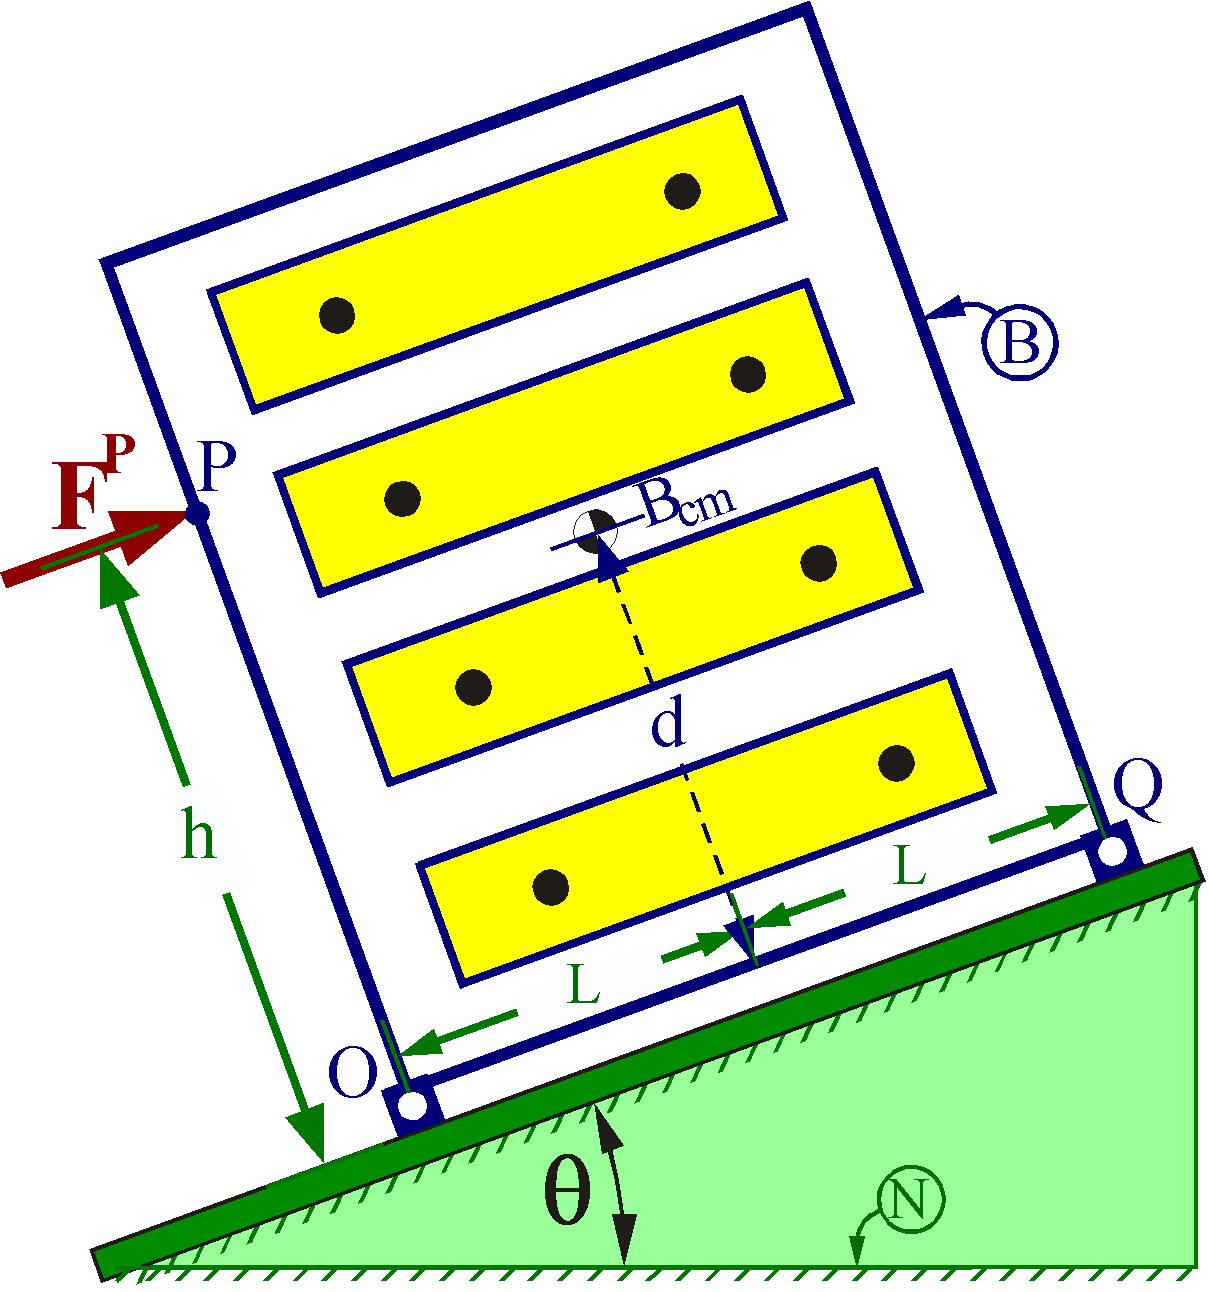 MotionGenesis Bureau (chest of drawers) on inclined plane schematic